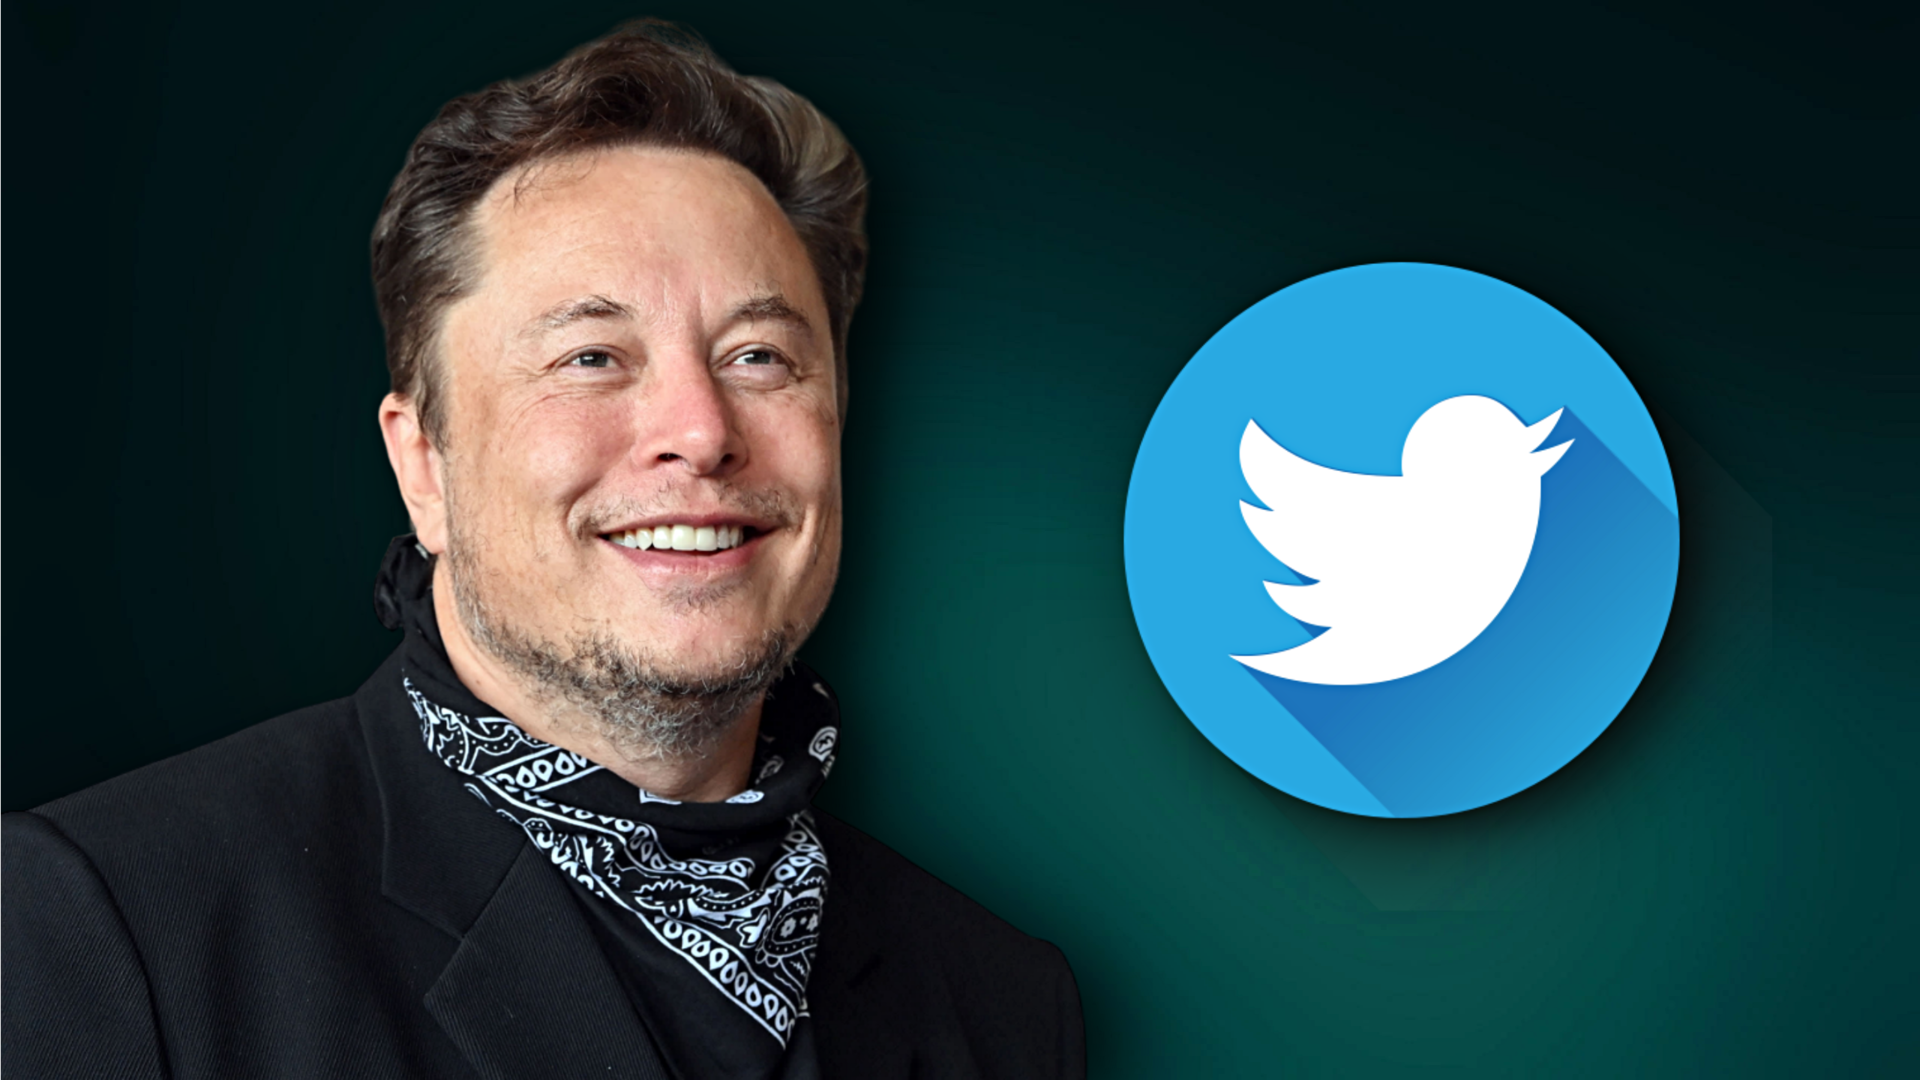 Elon Musk to open source Twitter's algorithm on March 31